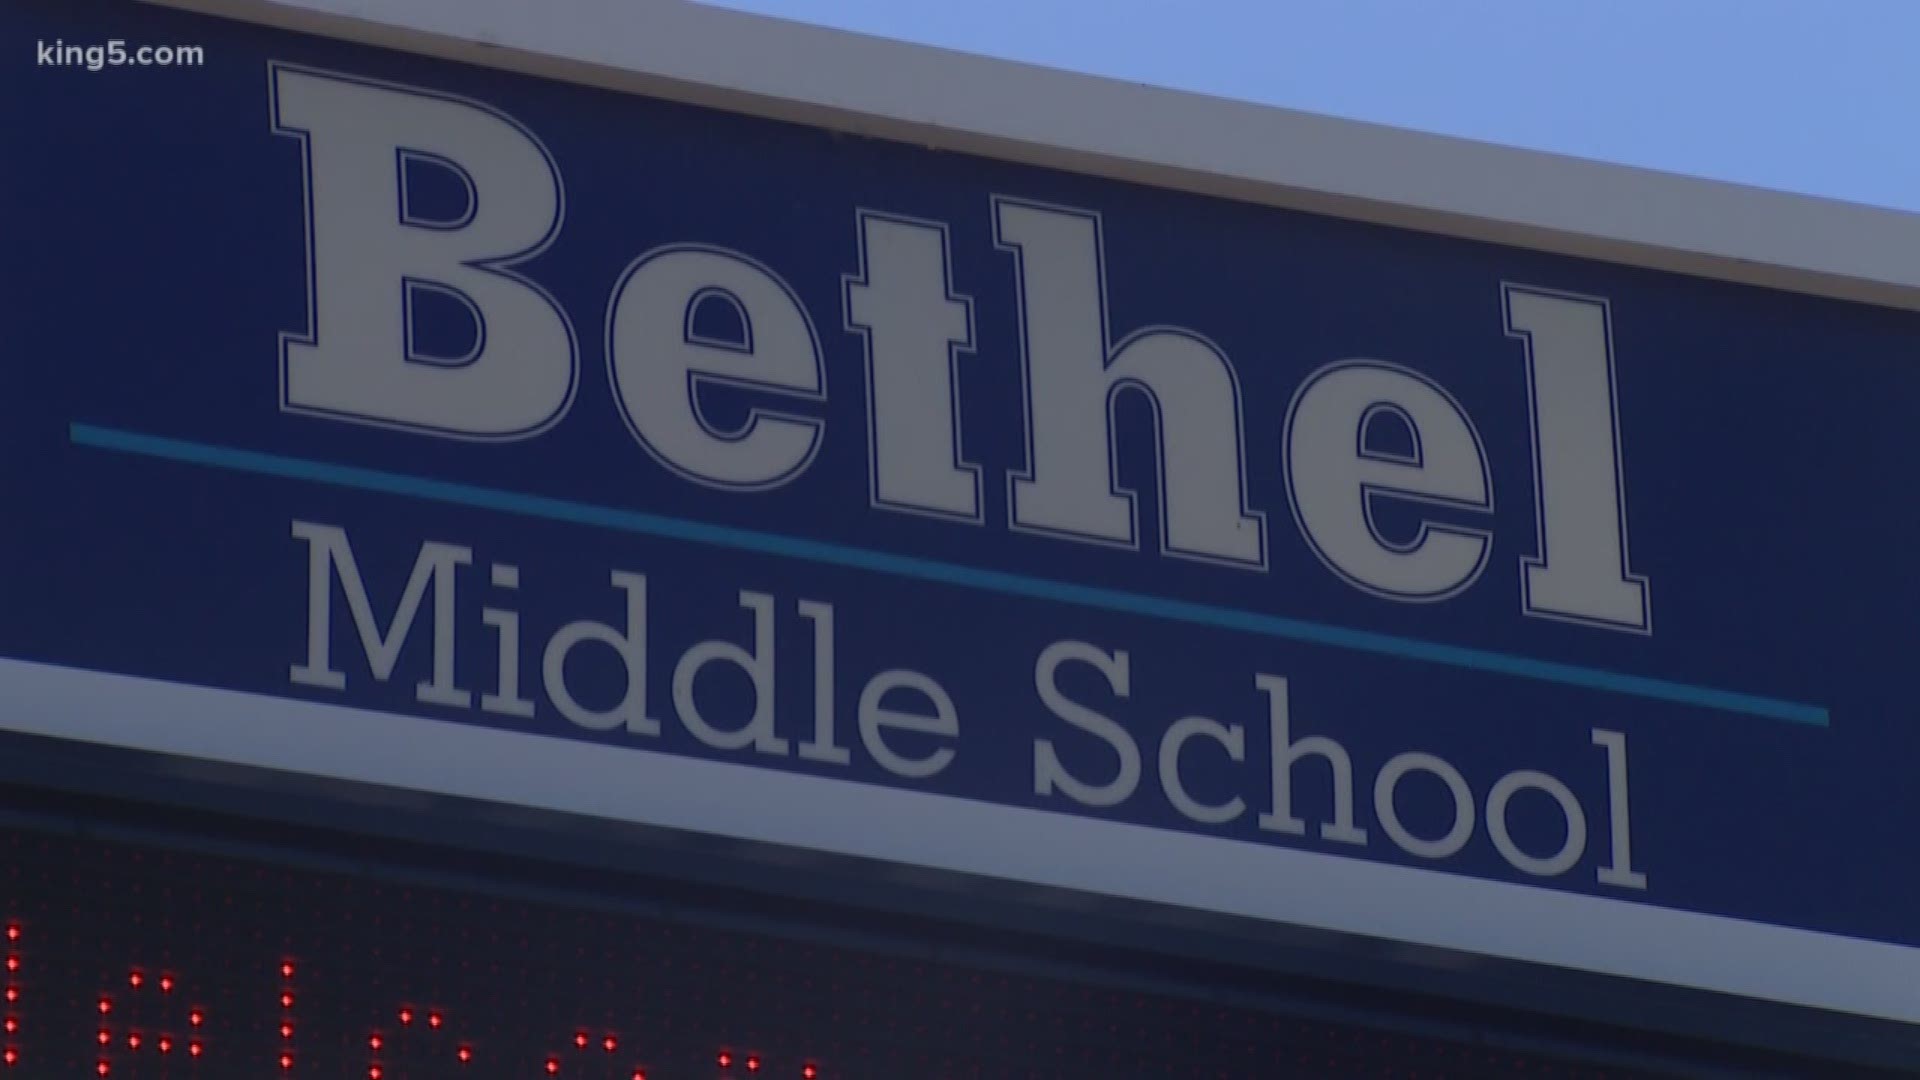 A new clinic at Bethel Middle School will be staffed with with a dentist, nurse practitioner, and behavior health professionals. KING 5's Sebastian Robertson reports.